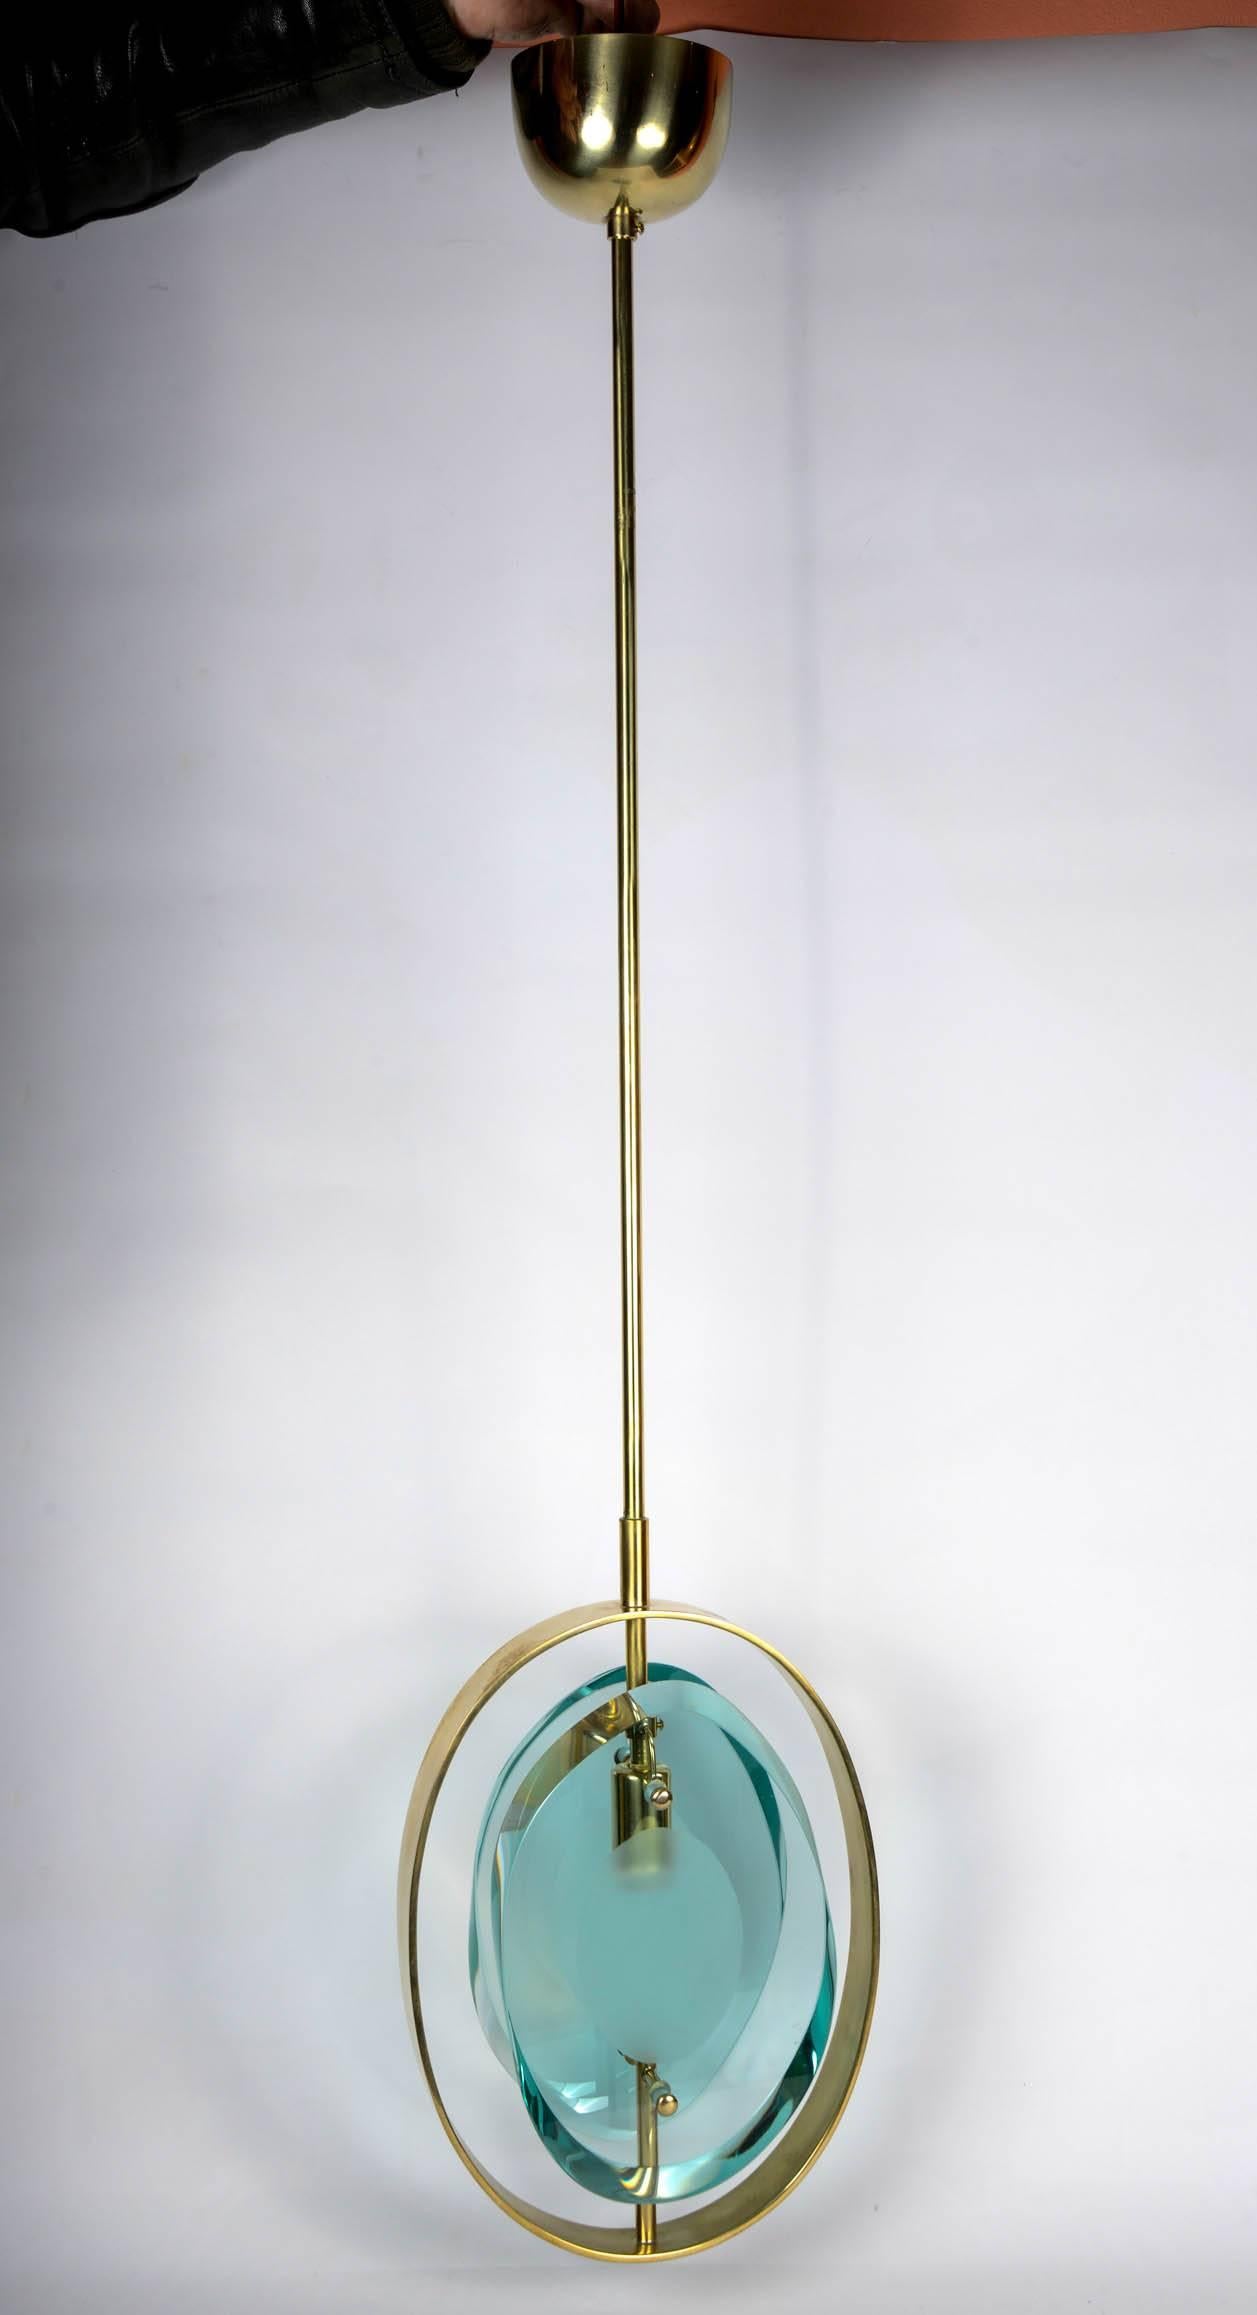 Ceiling light in the style of Max Ingrand (Italy, 1908-1969), model n°1933 for Fontana Arte.

Clear and partially frosted glass, brass.
Possibility of a second one.

Price provided for one.